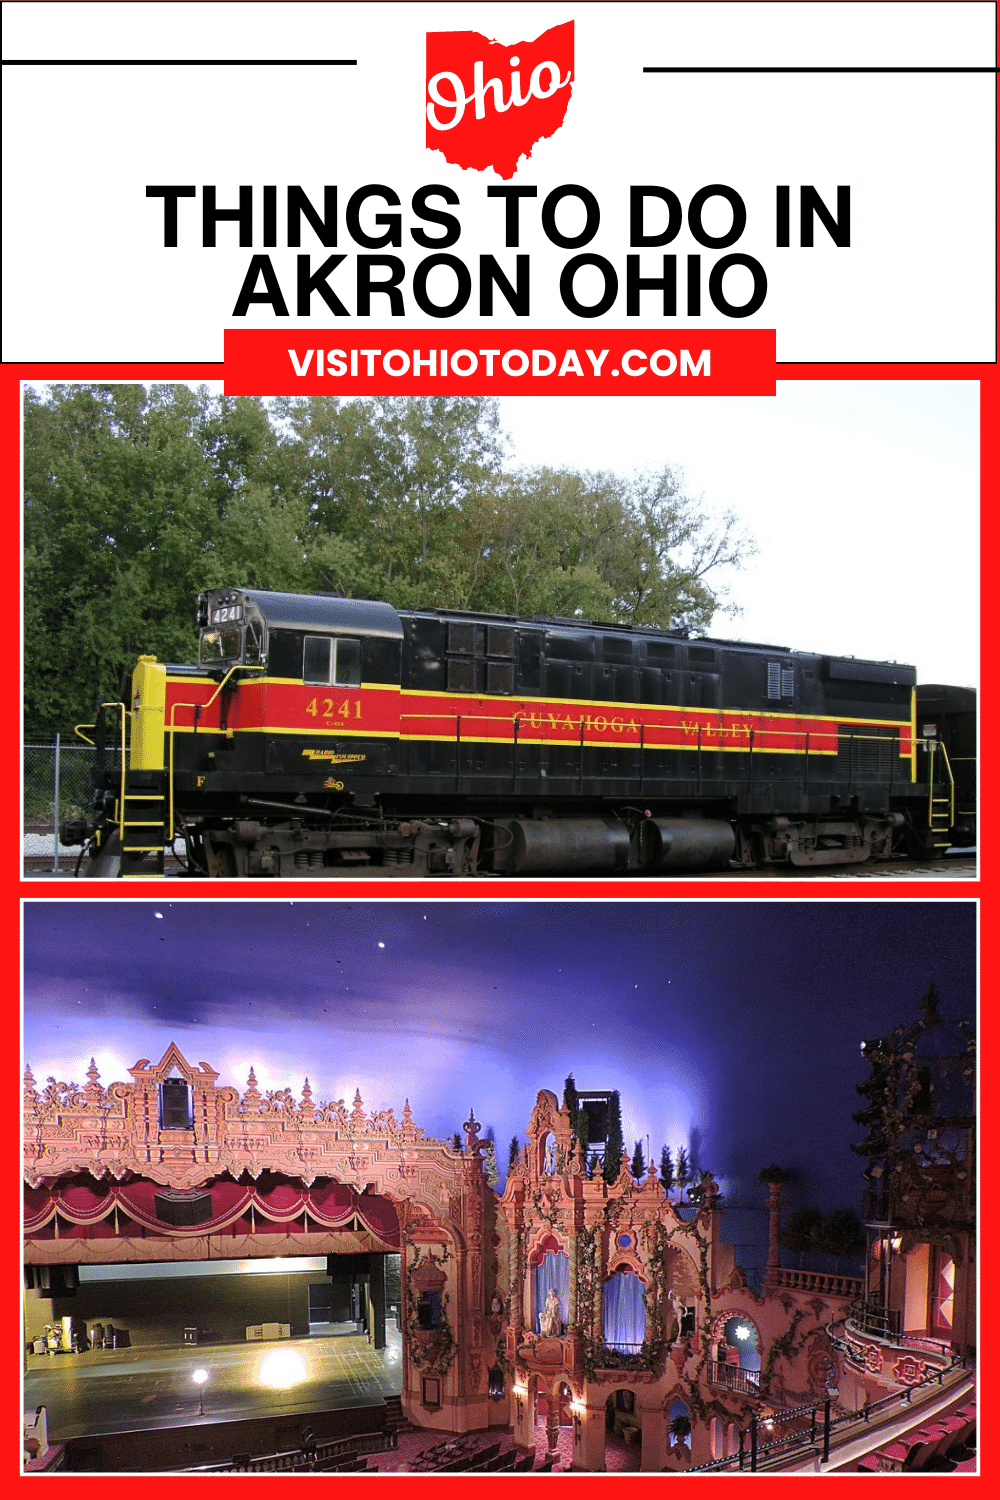 There are plenty of things to do in Akron, Ohio. Akron has a Zoo, Parks, Bars and Restaurants. There are also farms and Museums available for people to explore at their leisure. Akron, Ohio has something for everyone, whatever the age. | Things To Do In Akron | Summit County Ohio | Akron Ohio